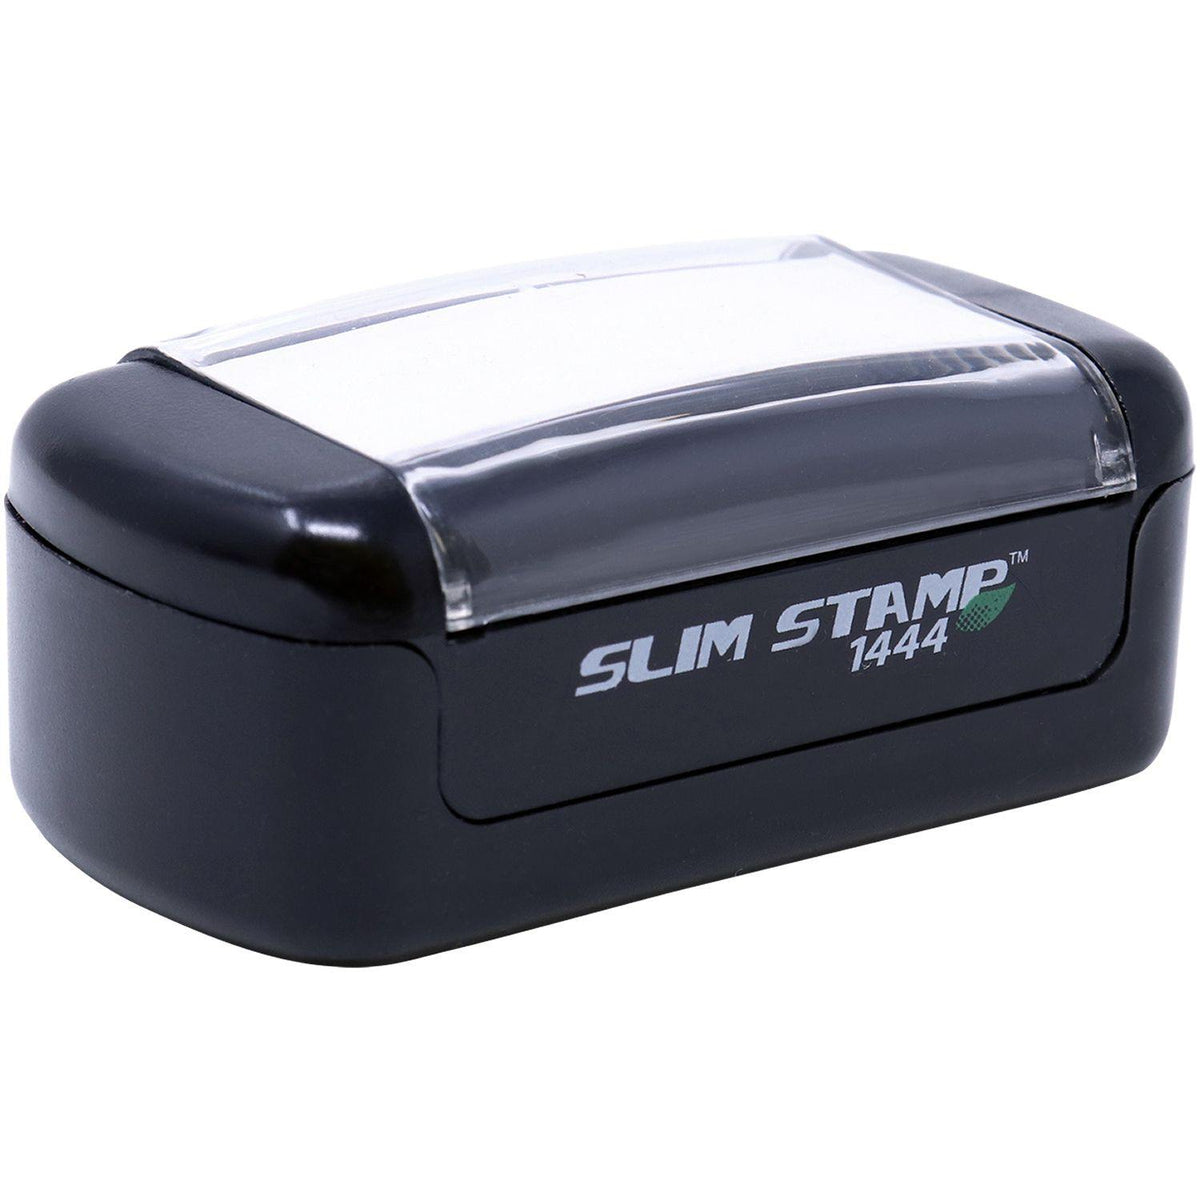 Alt View of Slim Pre Inked Dnr Stamp Mount Angle